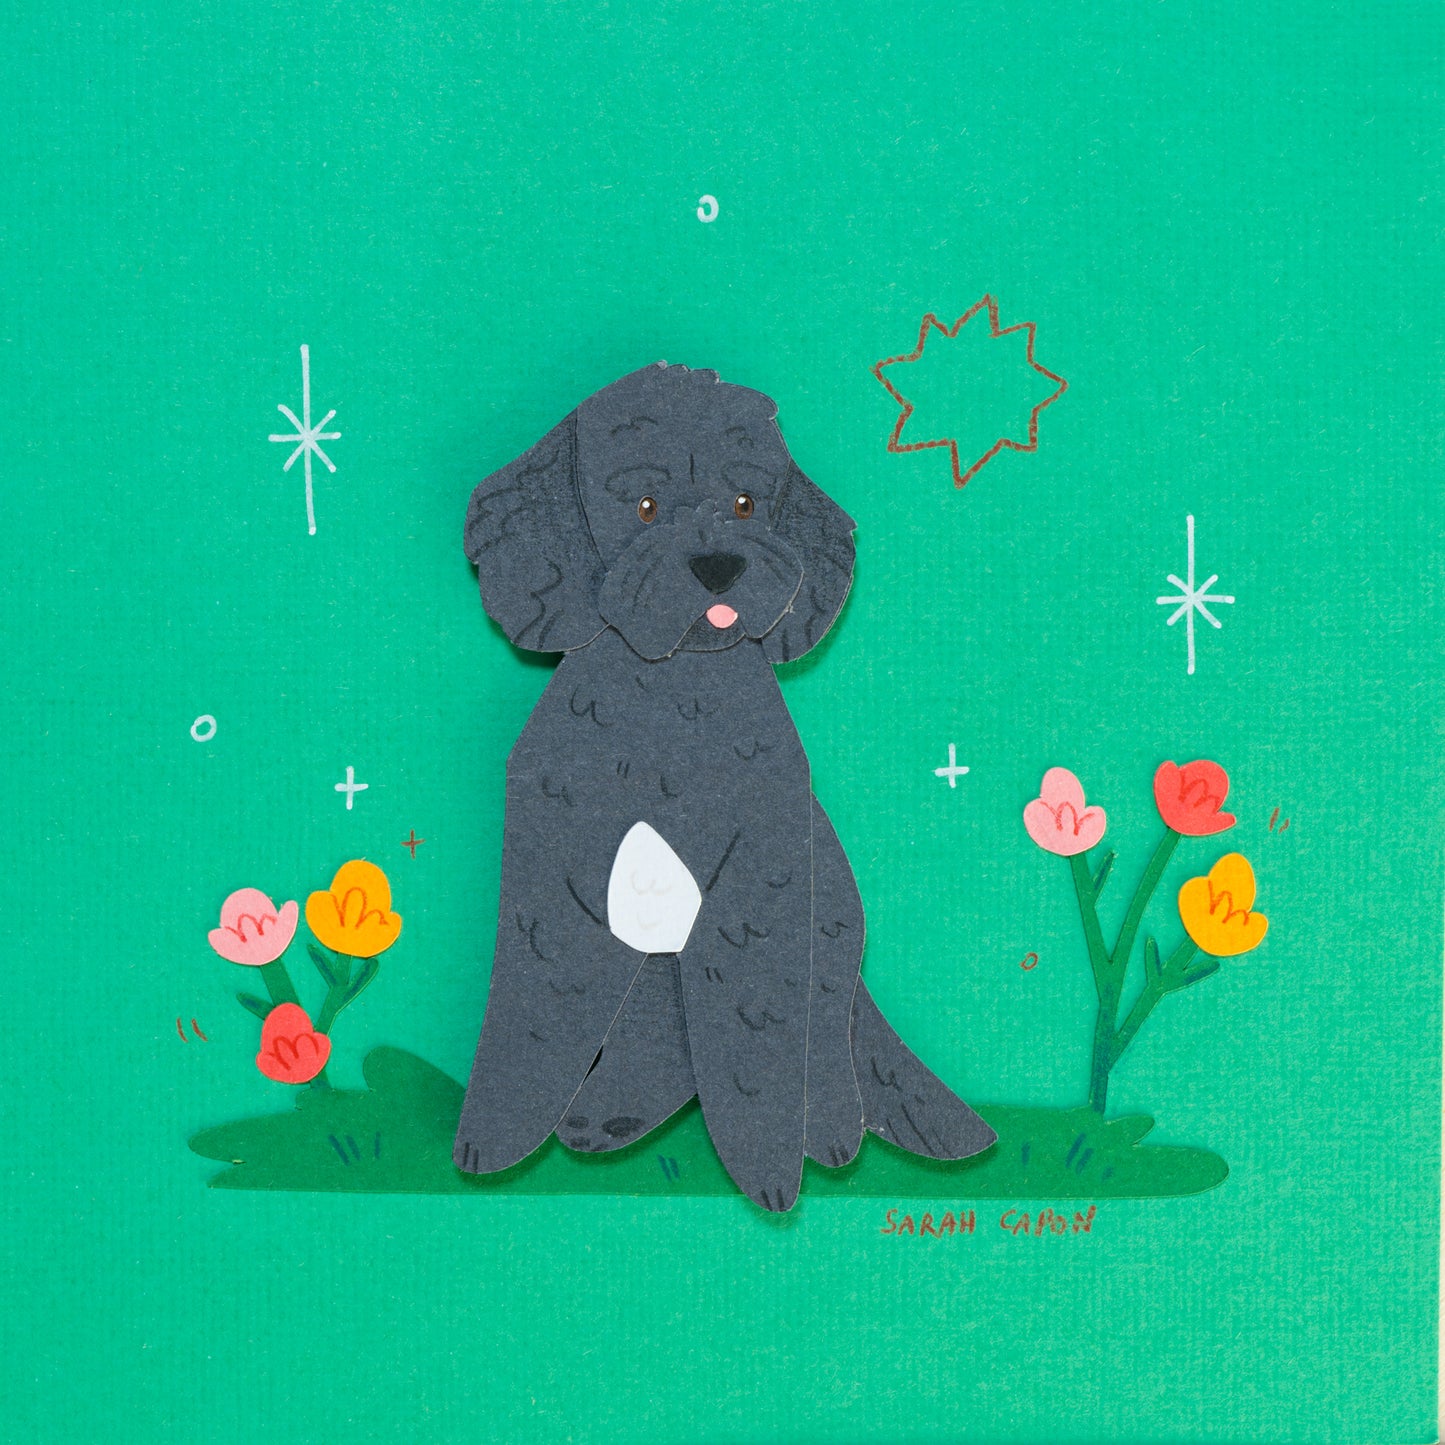 Small Poodle / Oodle